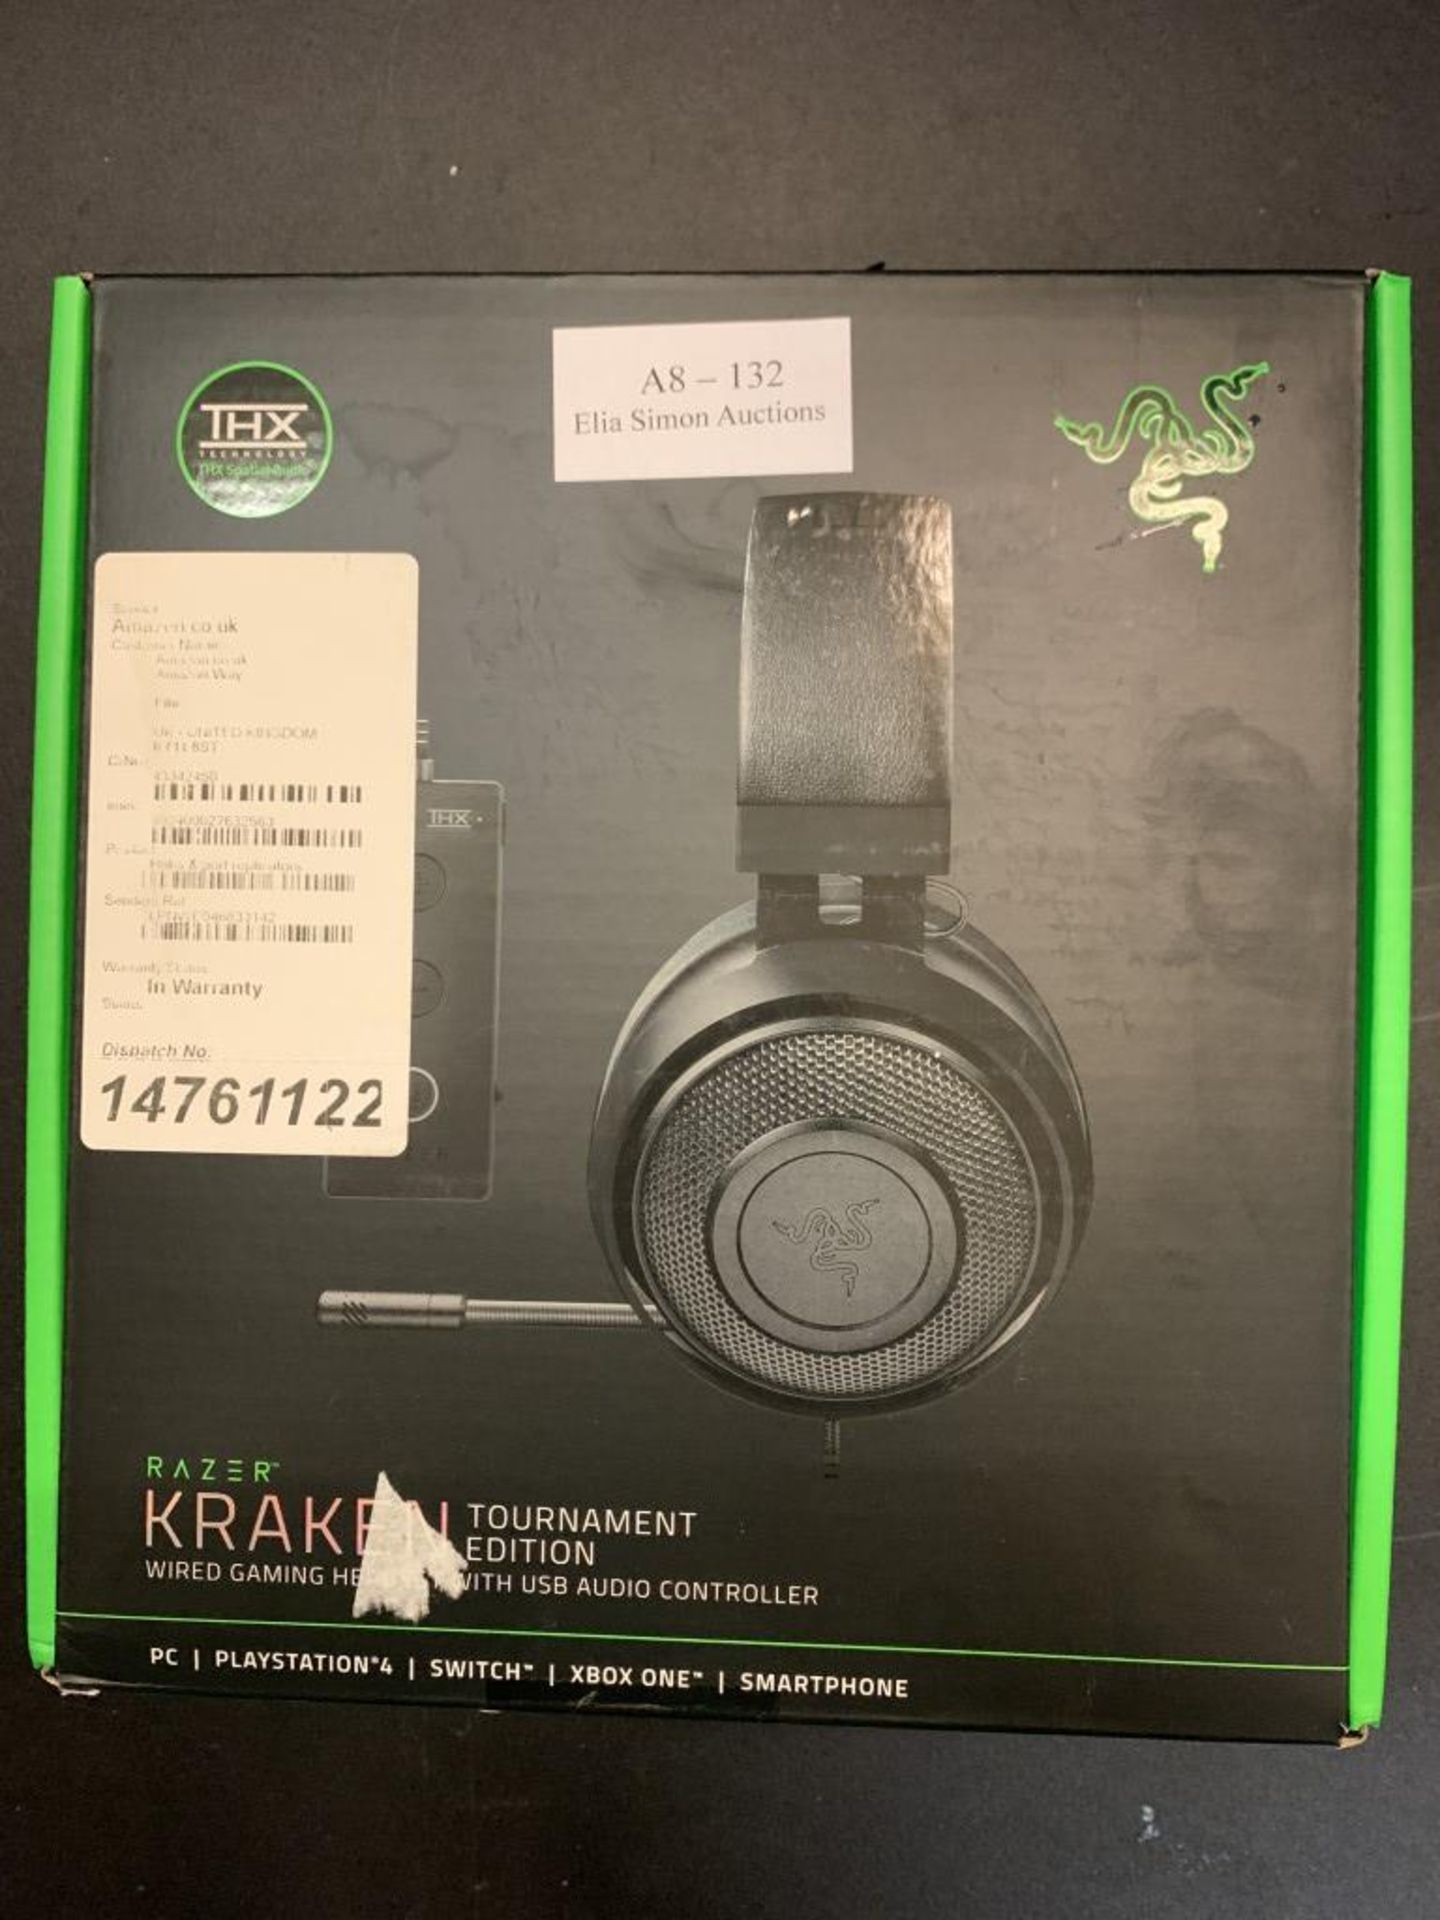 Razer Kraken Tournament Edition - Esports Gaming Headset (Wired Gaming Headphones with USB Audio Con - Image 2 of 2